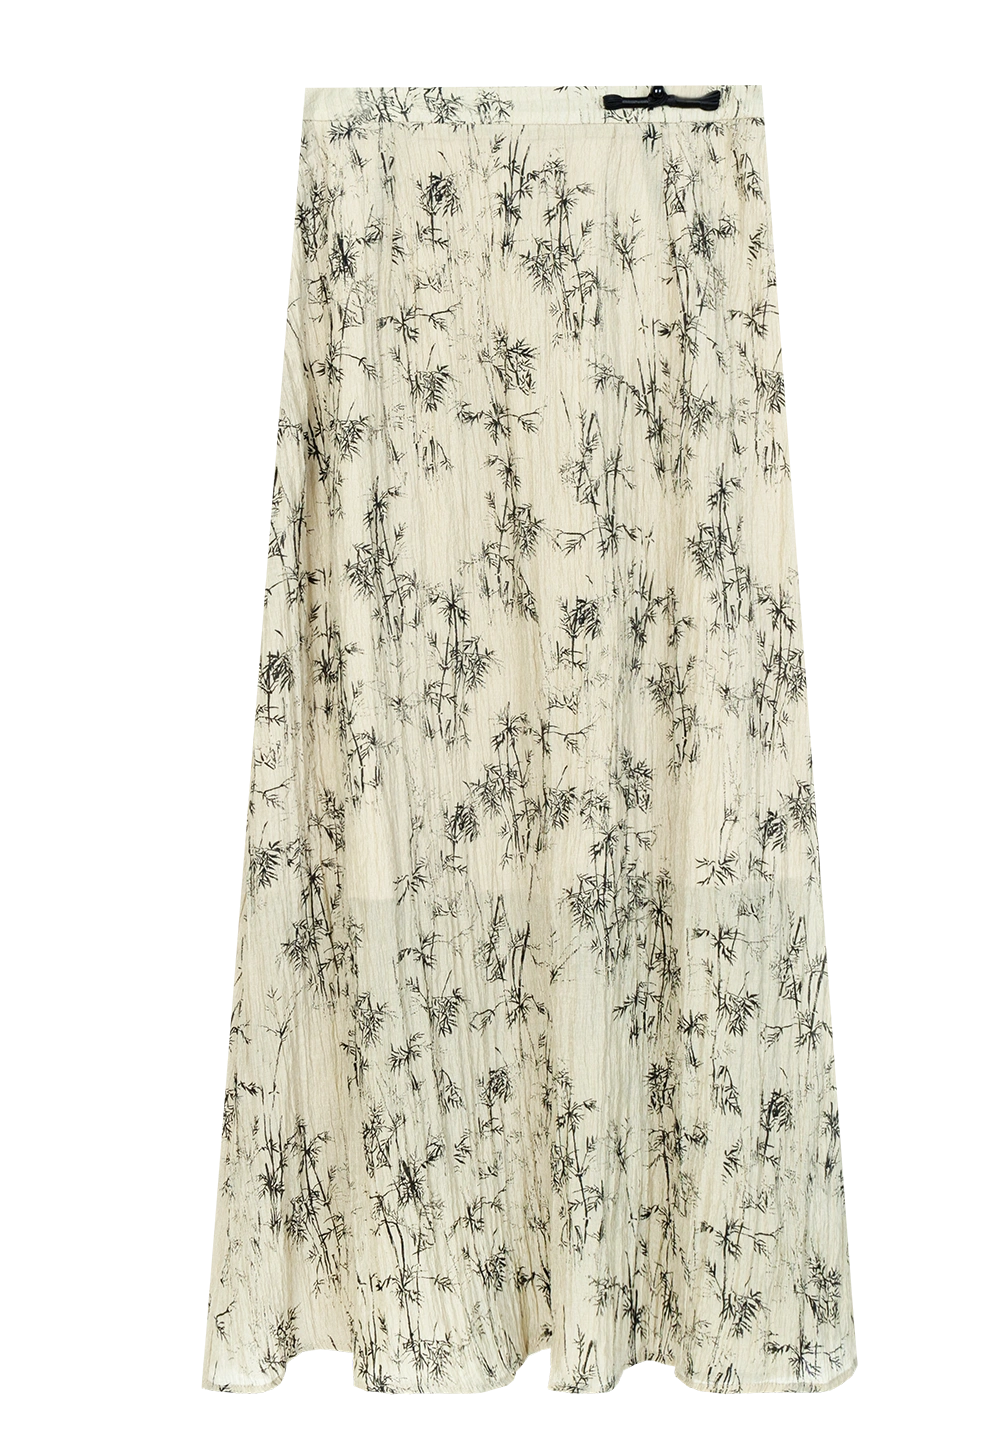 Women's Beige Maxi Skirt with Black Bamboo Print - Flowy Fabric, Elegant for All Seasons